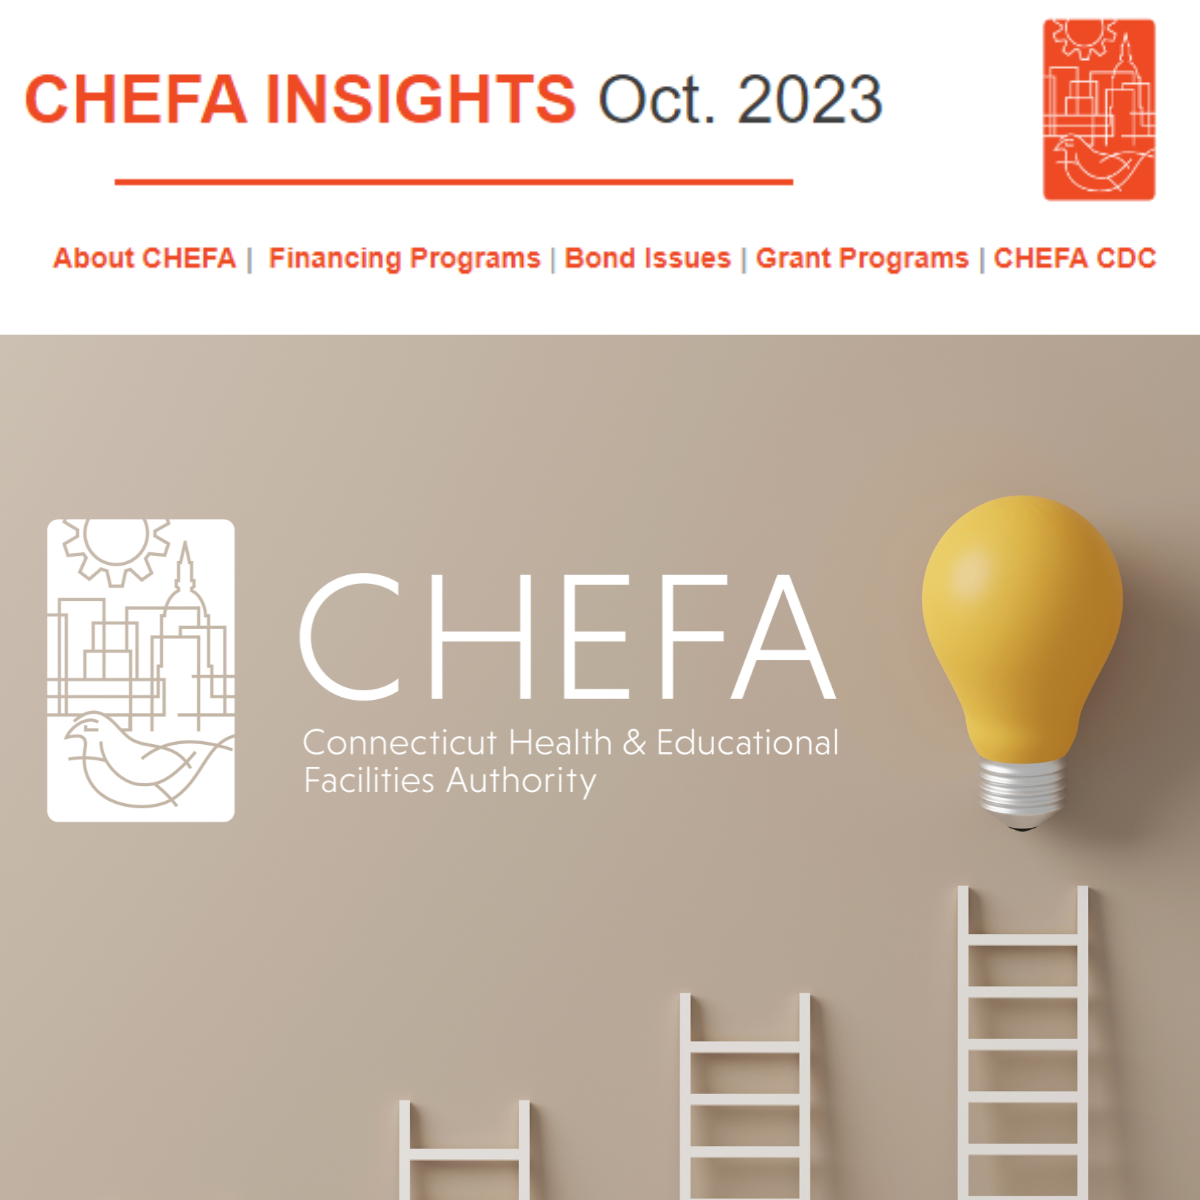 CHEFA Insights October 2023 banner with ascending ladders and a lightbulb at the top